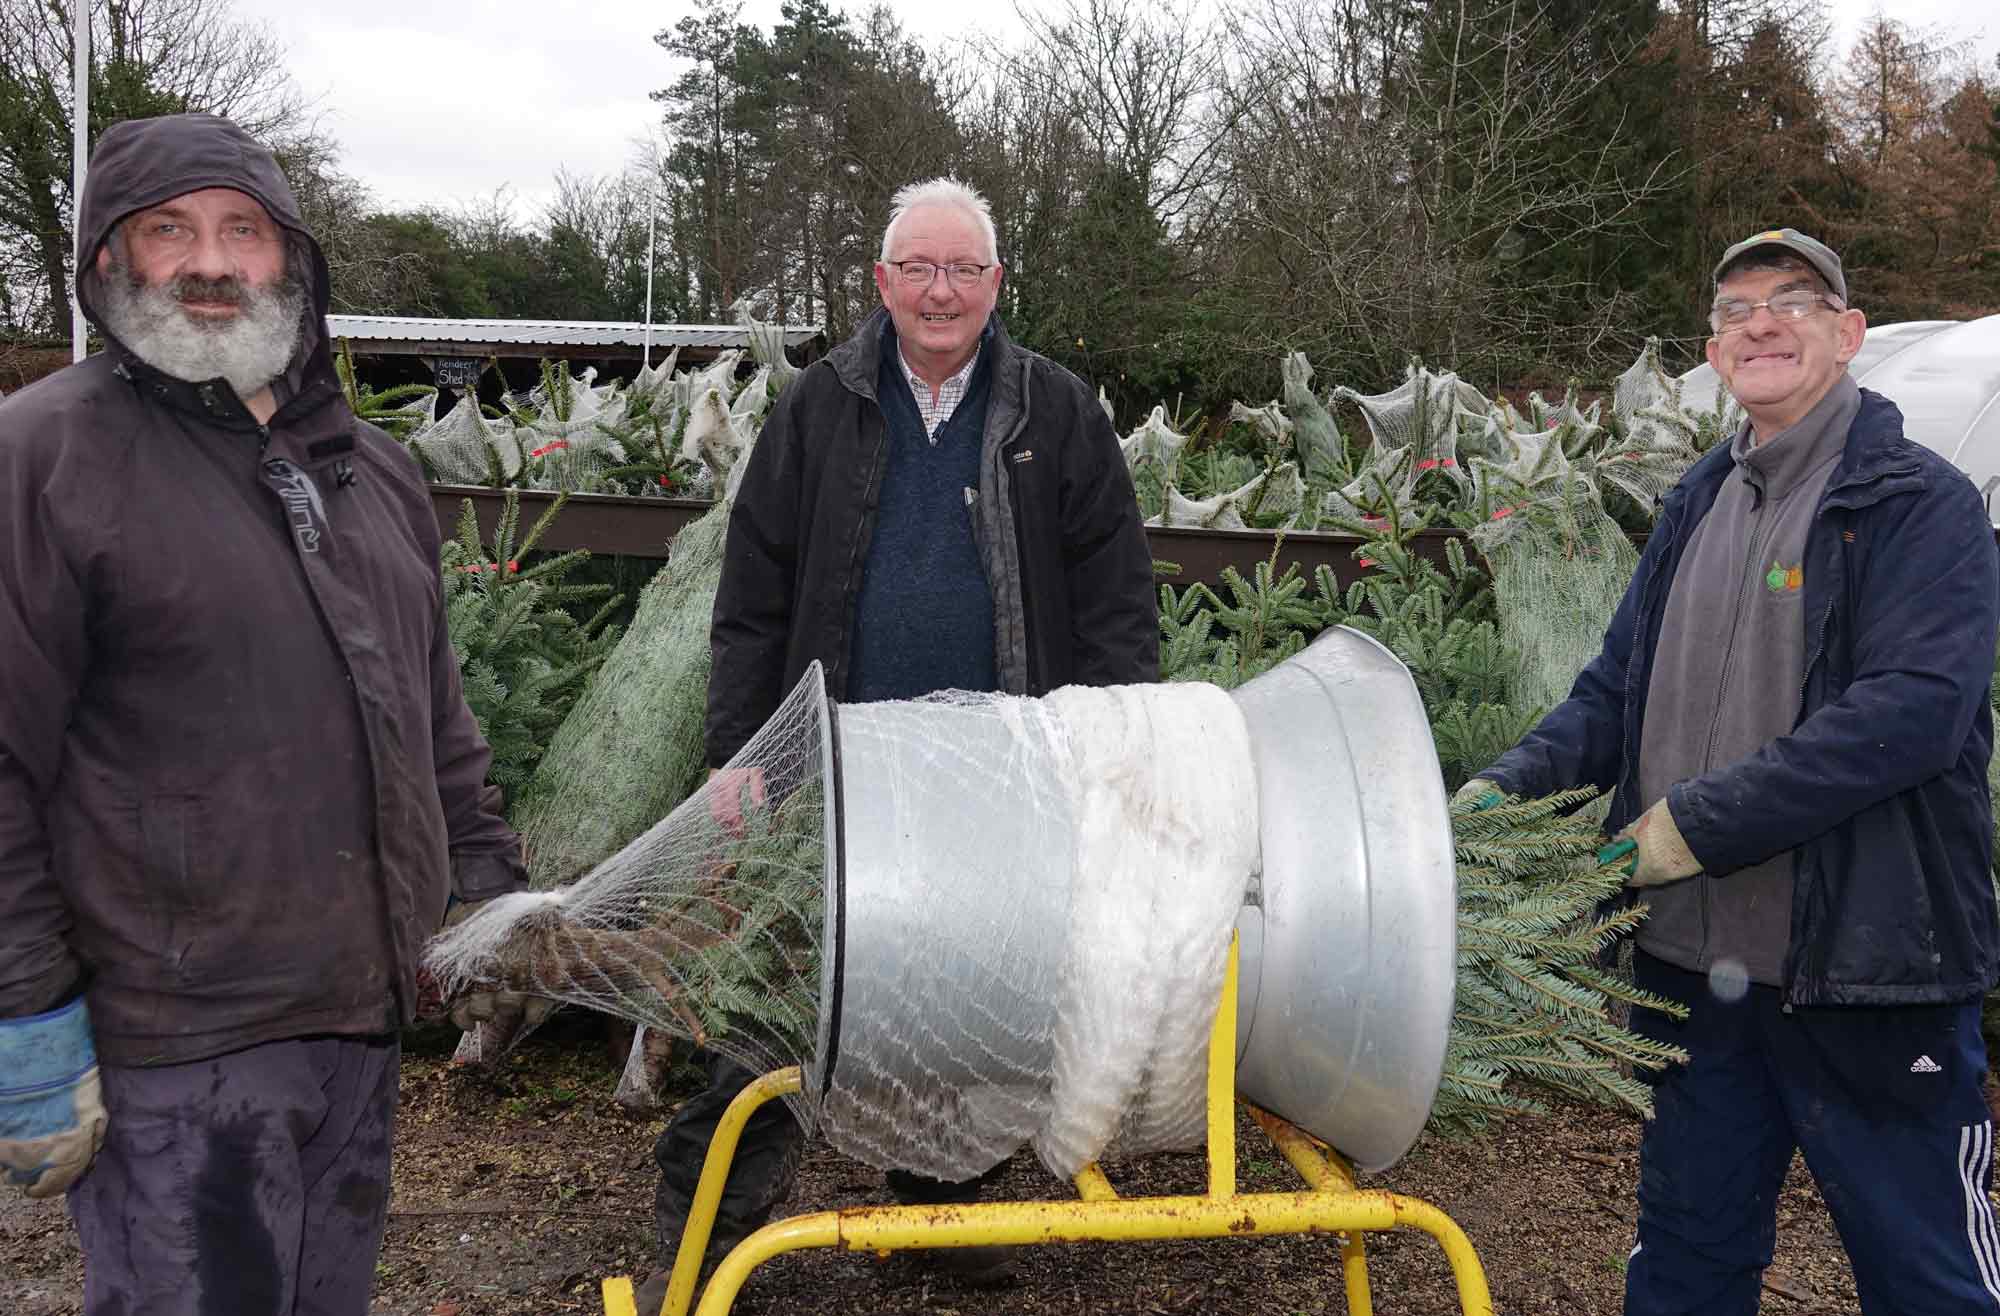 “Treemendous” Effort! Pictured from left are service user Adrian Kitchen, Rob Goodridge, and service user Stephen Green at Ripon Walled Garden